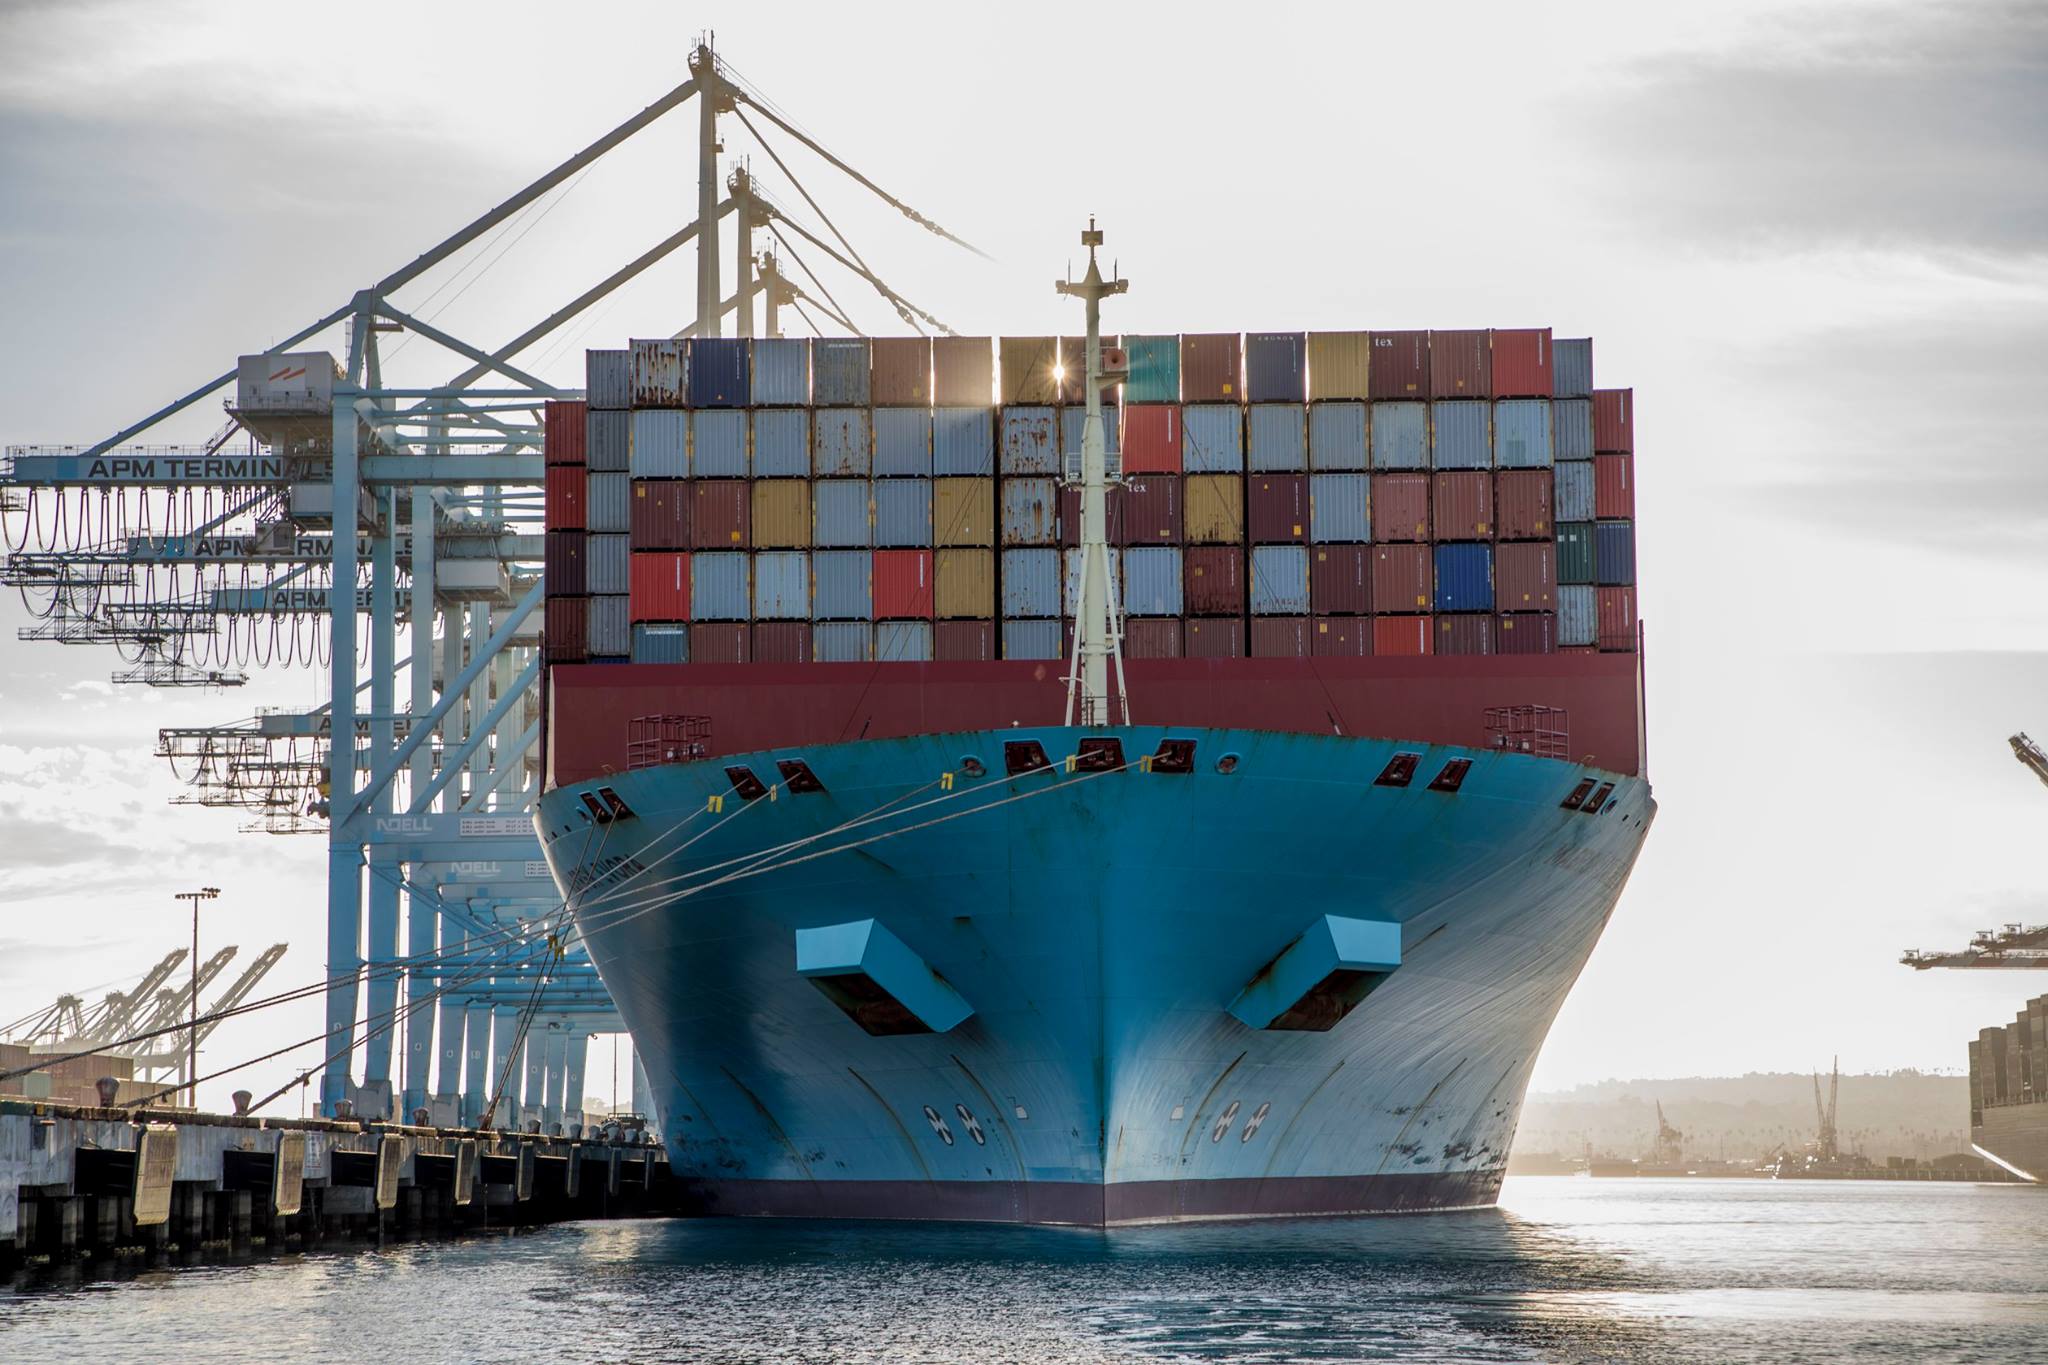 Maersk Containership Sets Cargo Handling World Record at Port of Los Angeles